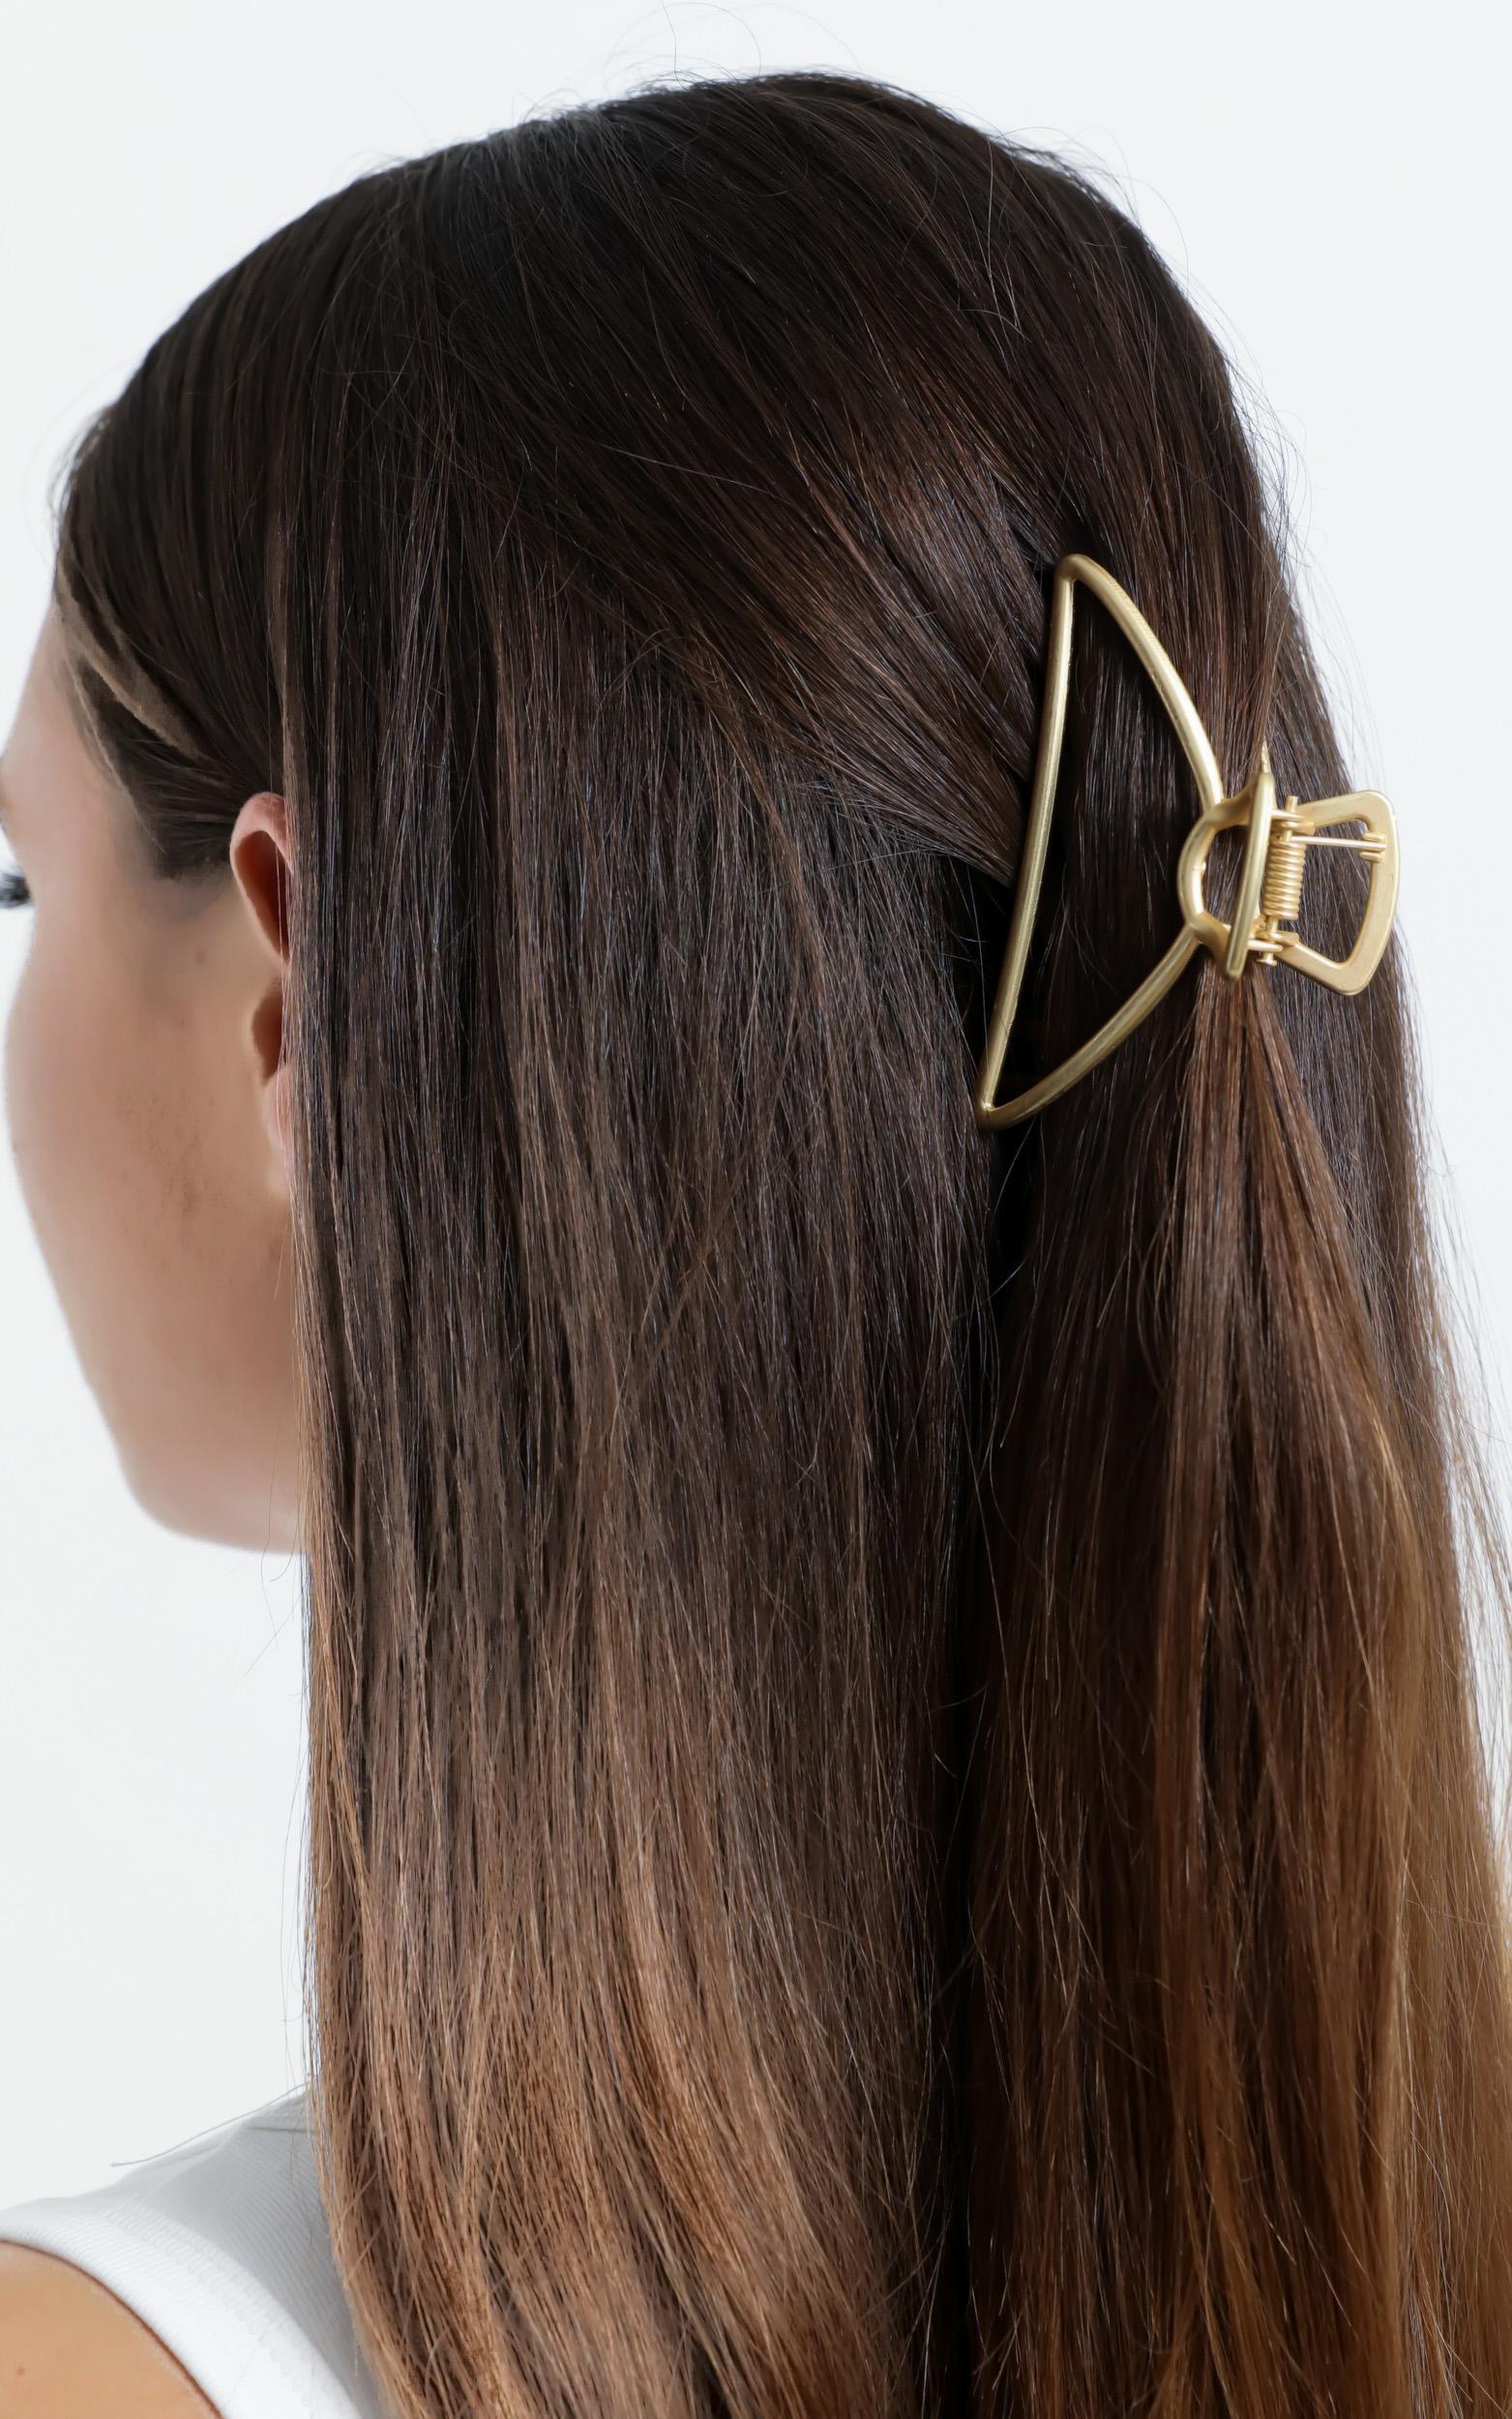 The Day Time Hair Clip in Gold, , hi-res image number null